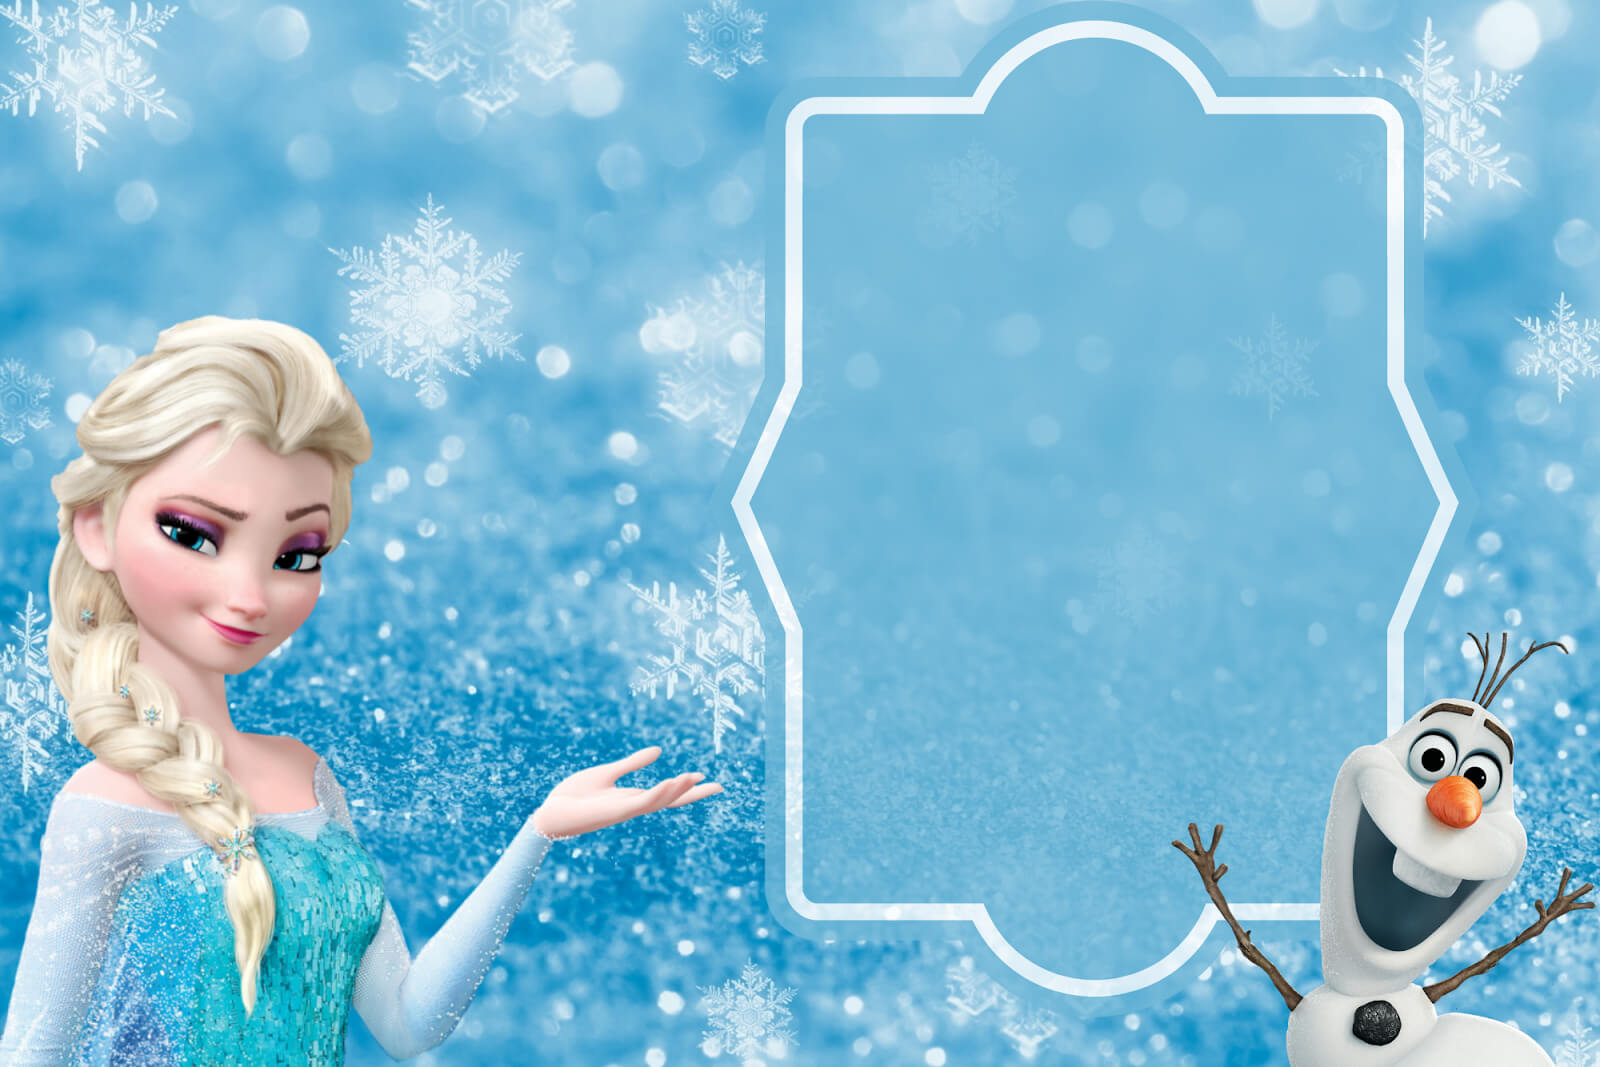 Free Frozen Party Invitation Template Download + Party Ideas In Frozen Birthday Card Template